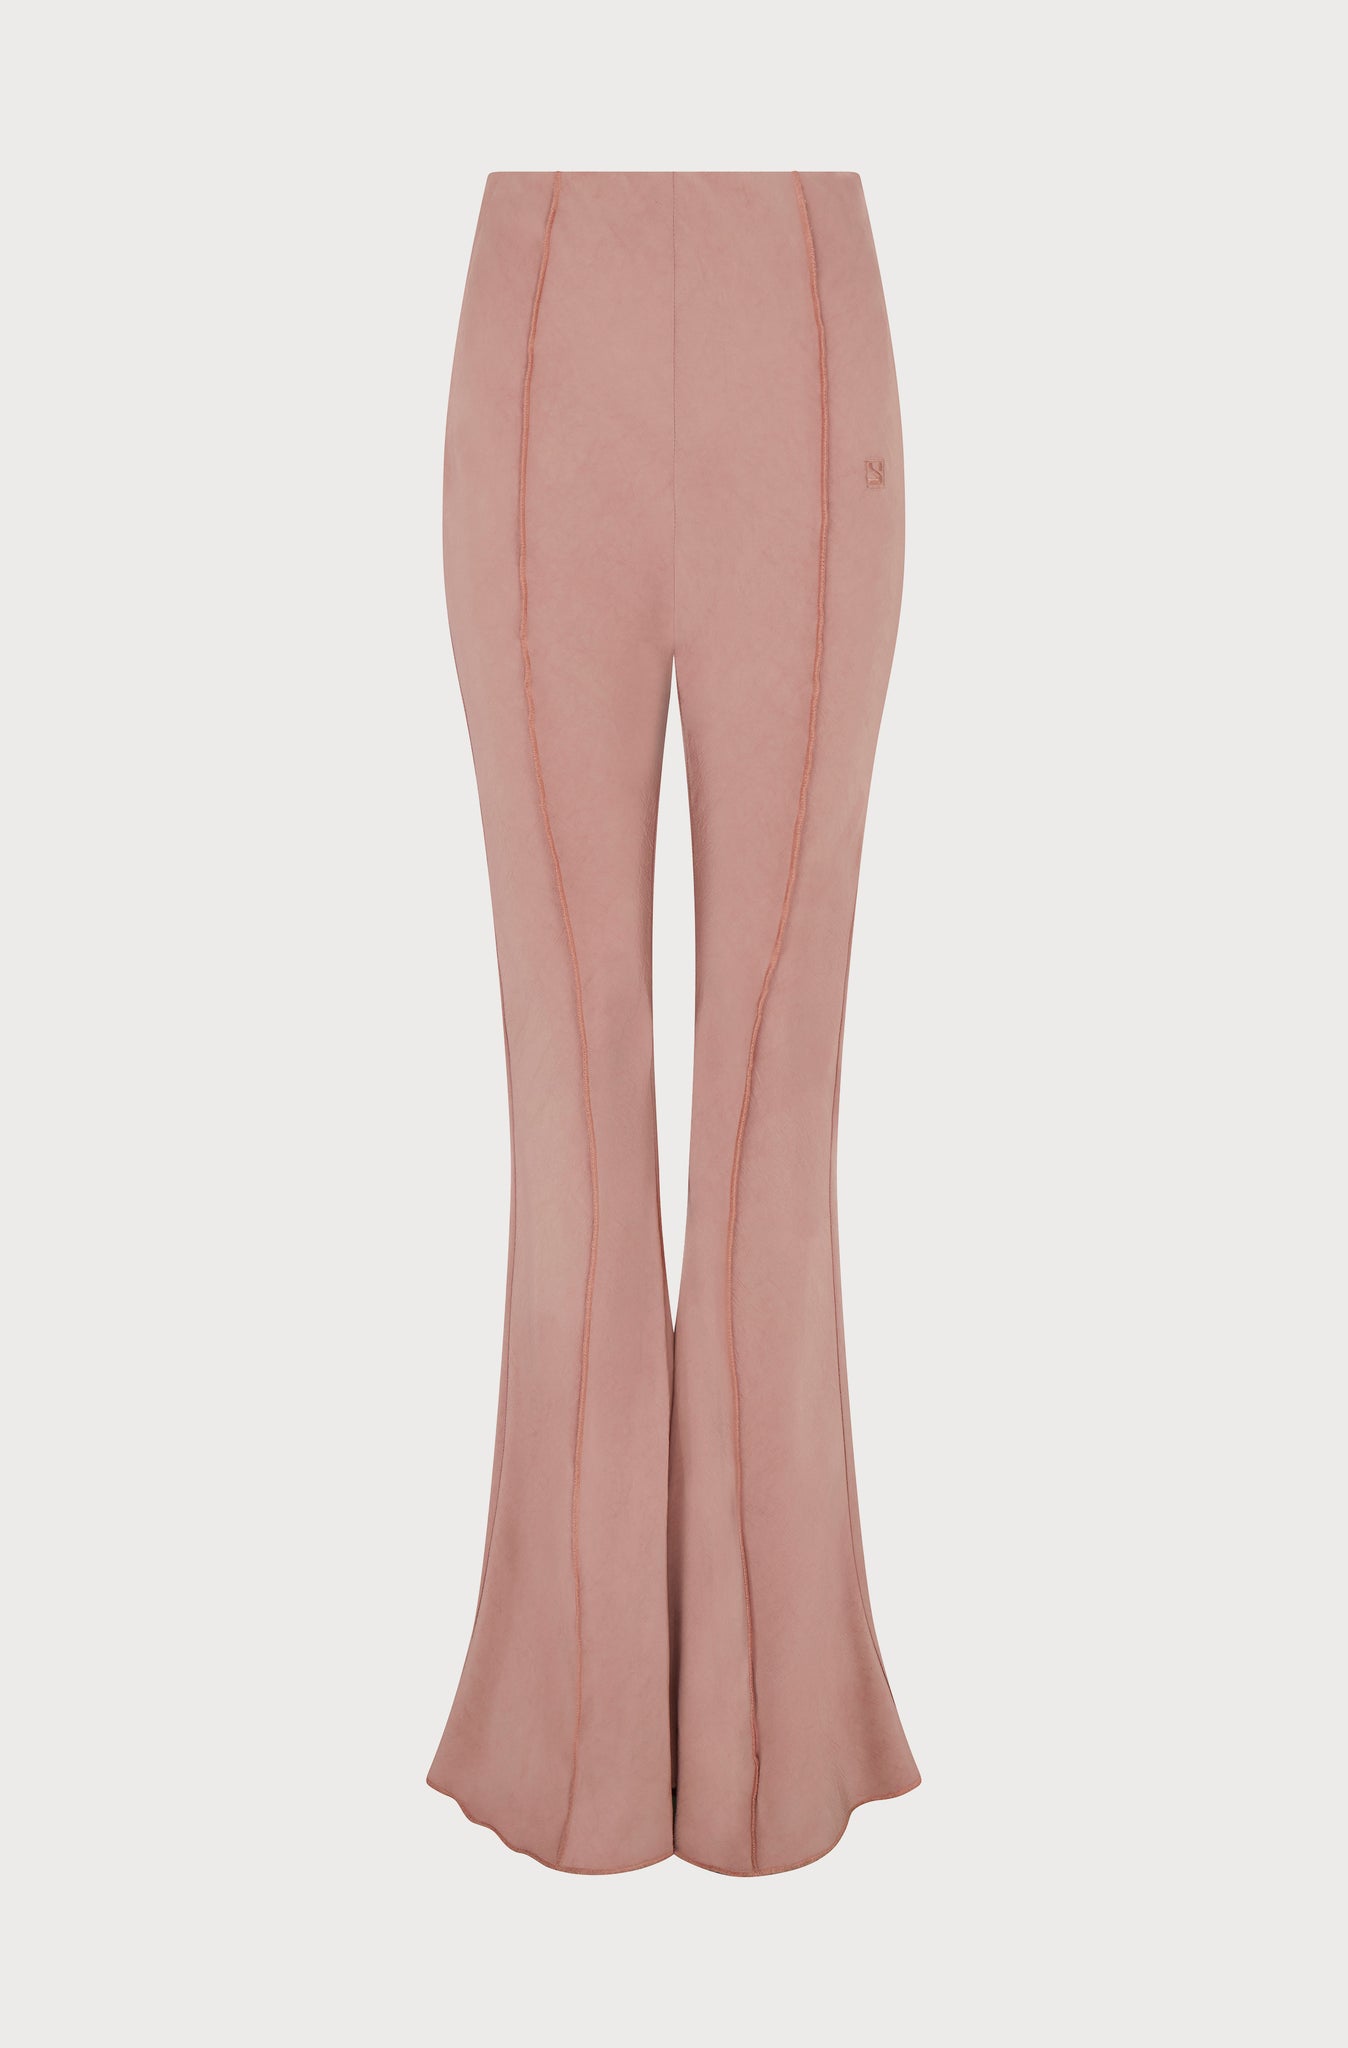 BABYLOCK FLARED TROUSERS - PINK CREPE